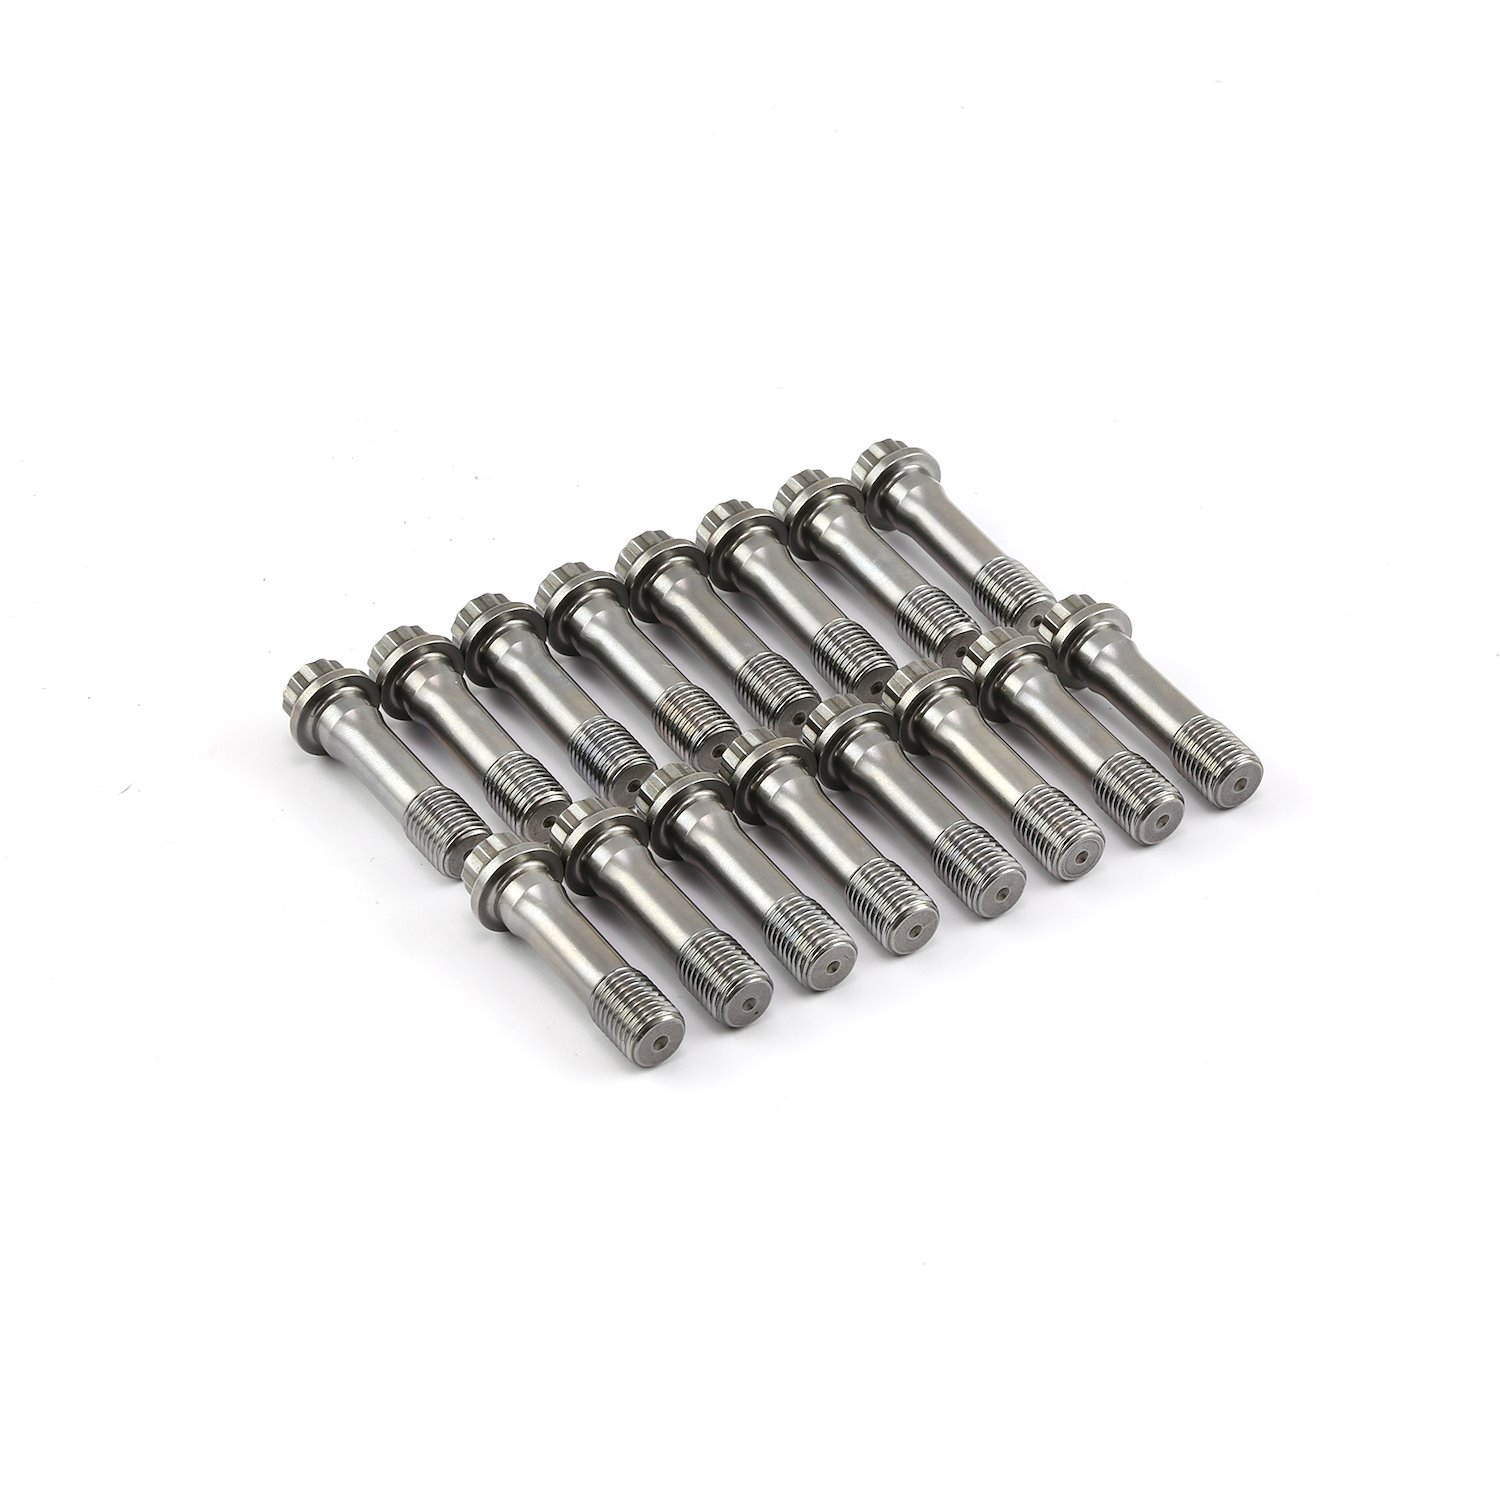 12 Point 7/16 1900-2000 Connecting Rod Bolts 16 Pcs